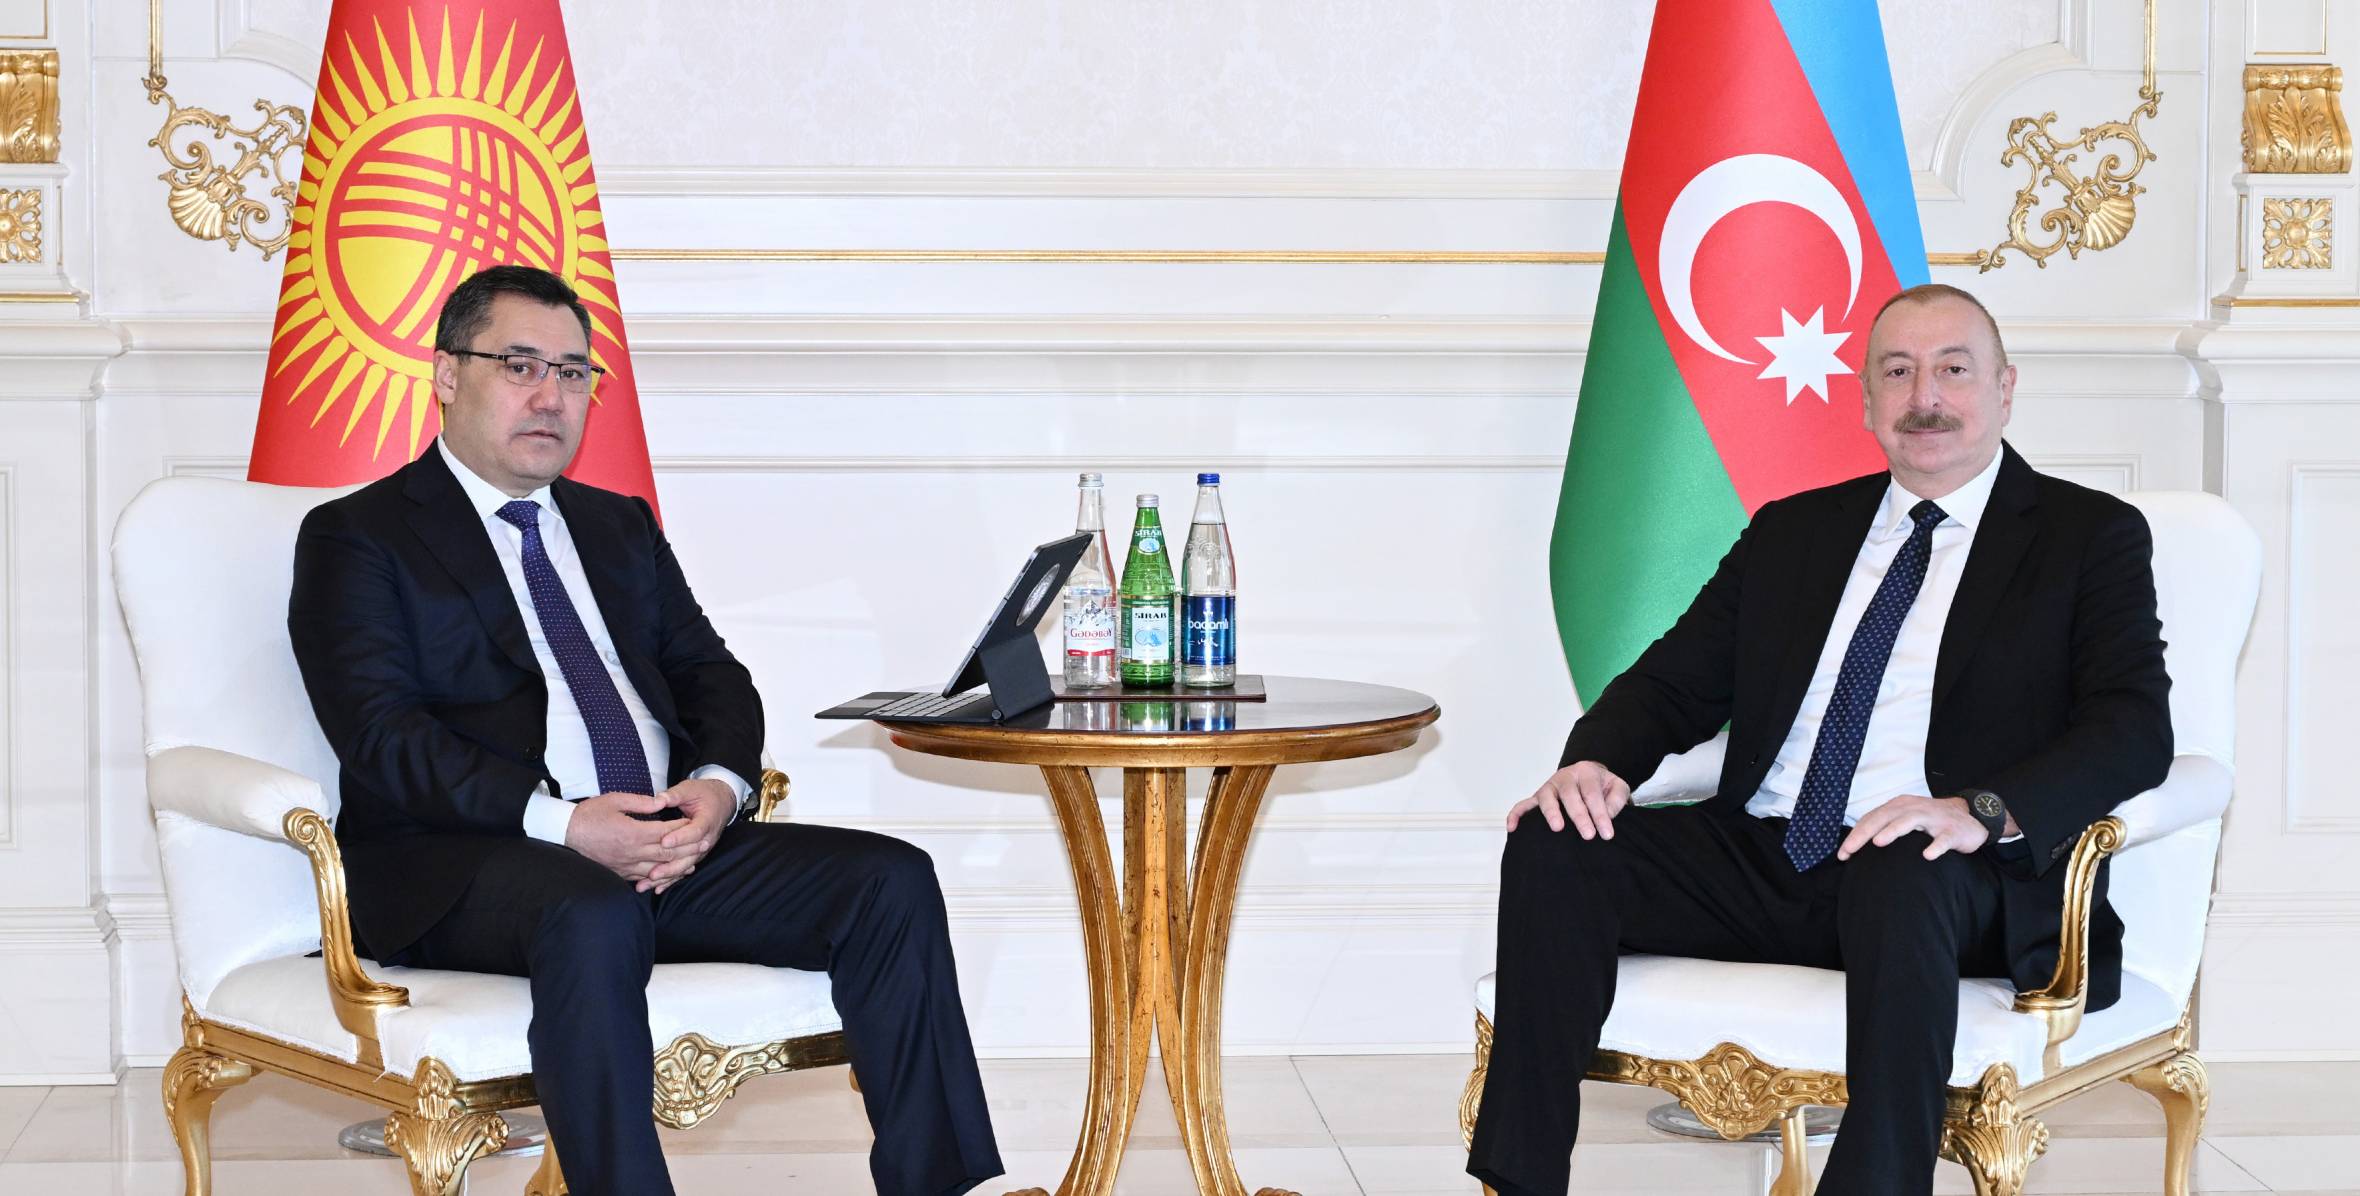 Presidents of Azerbaijan and Kyrgyzstan held meeting in limited format